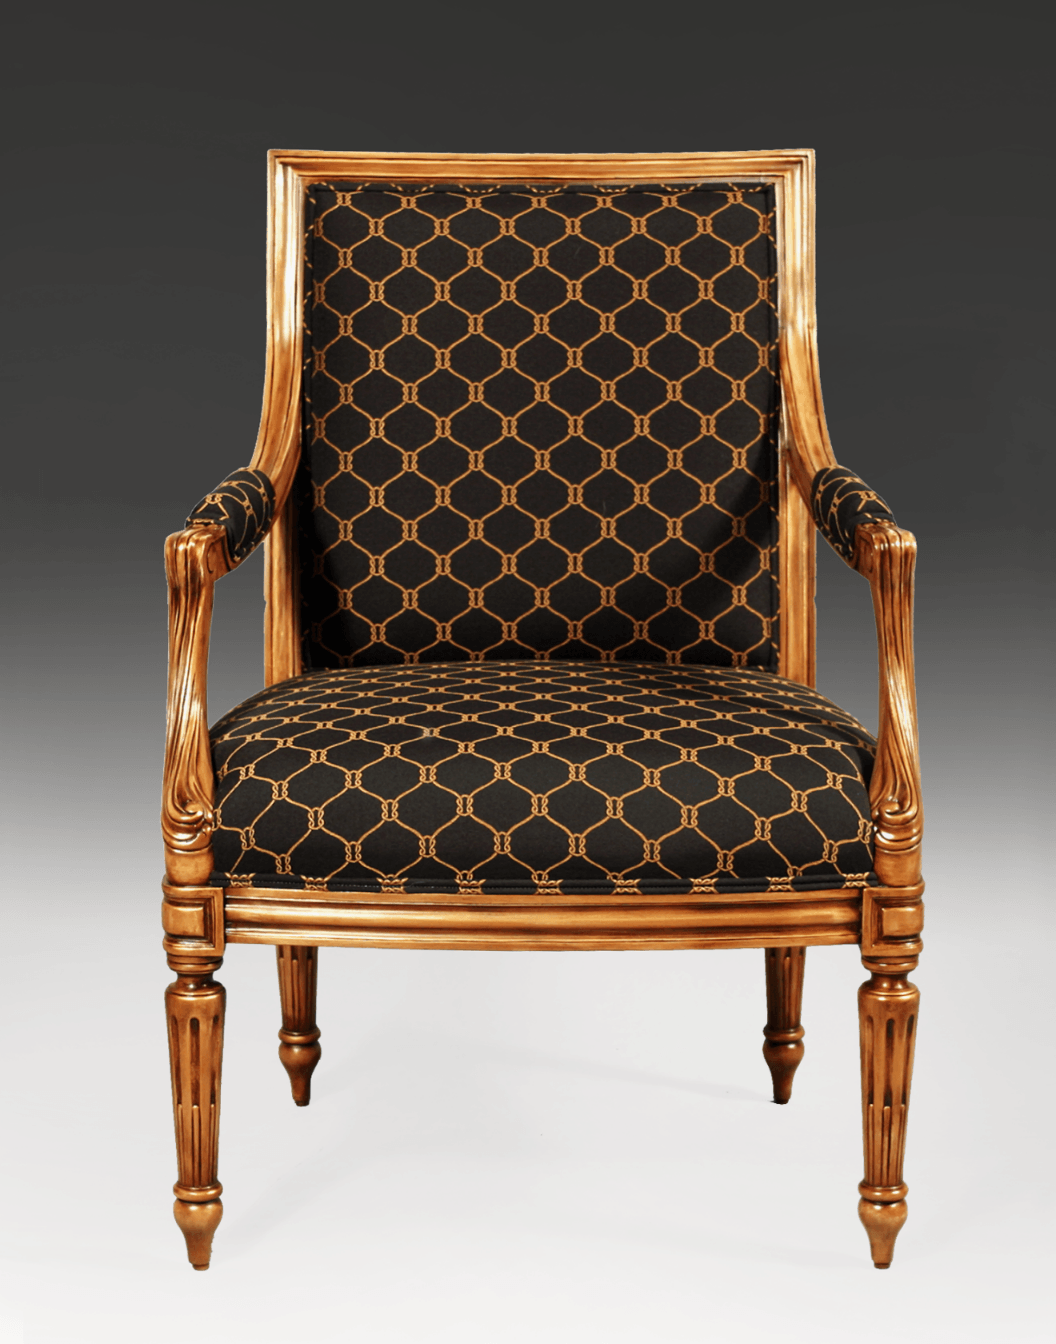 LOUIS XVI STYLE CHAIR - House of Chippendale